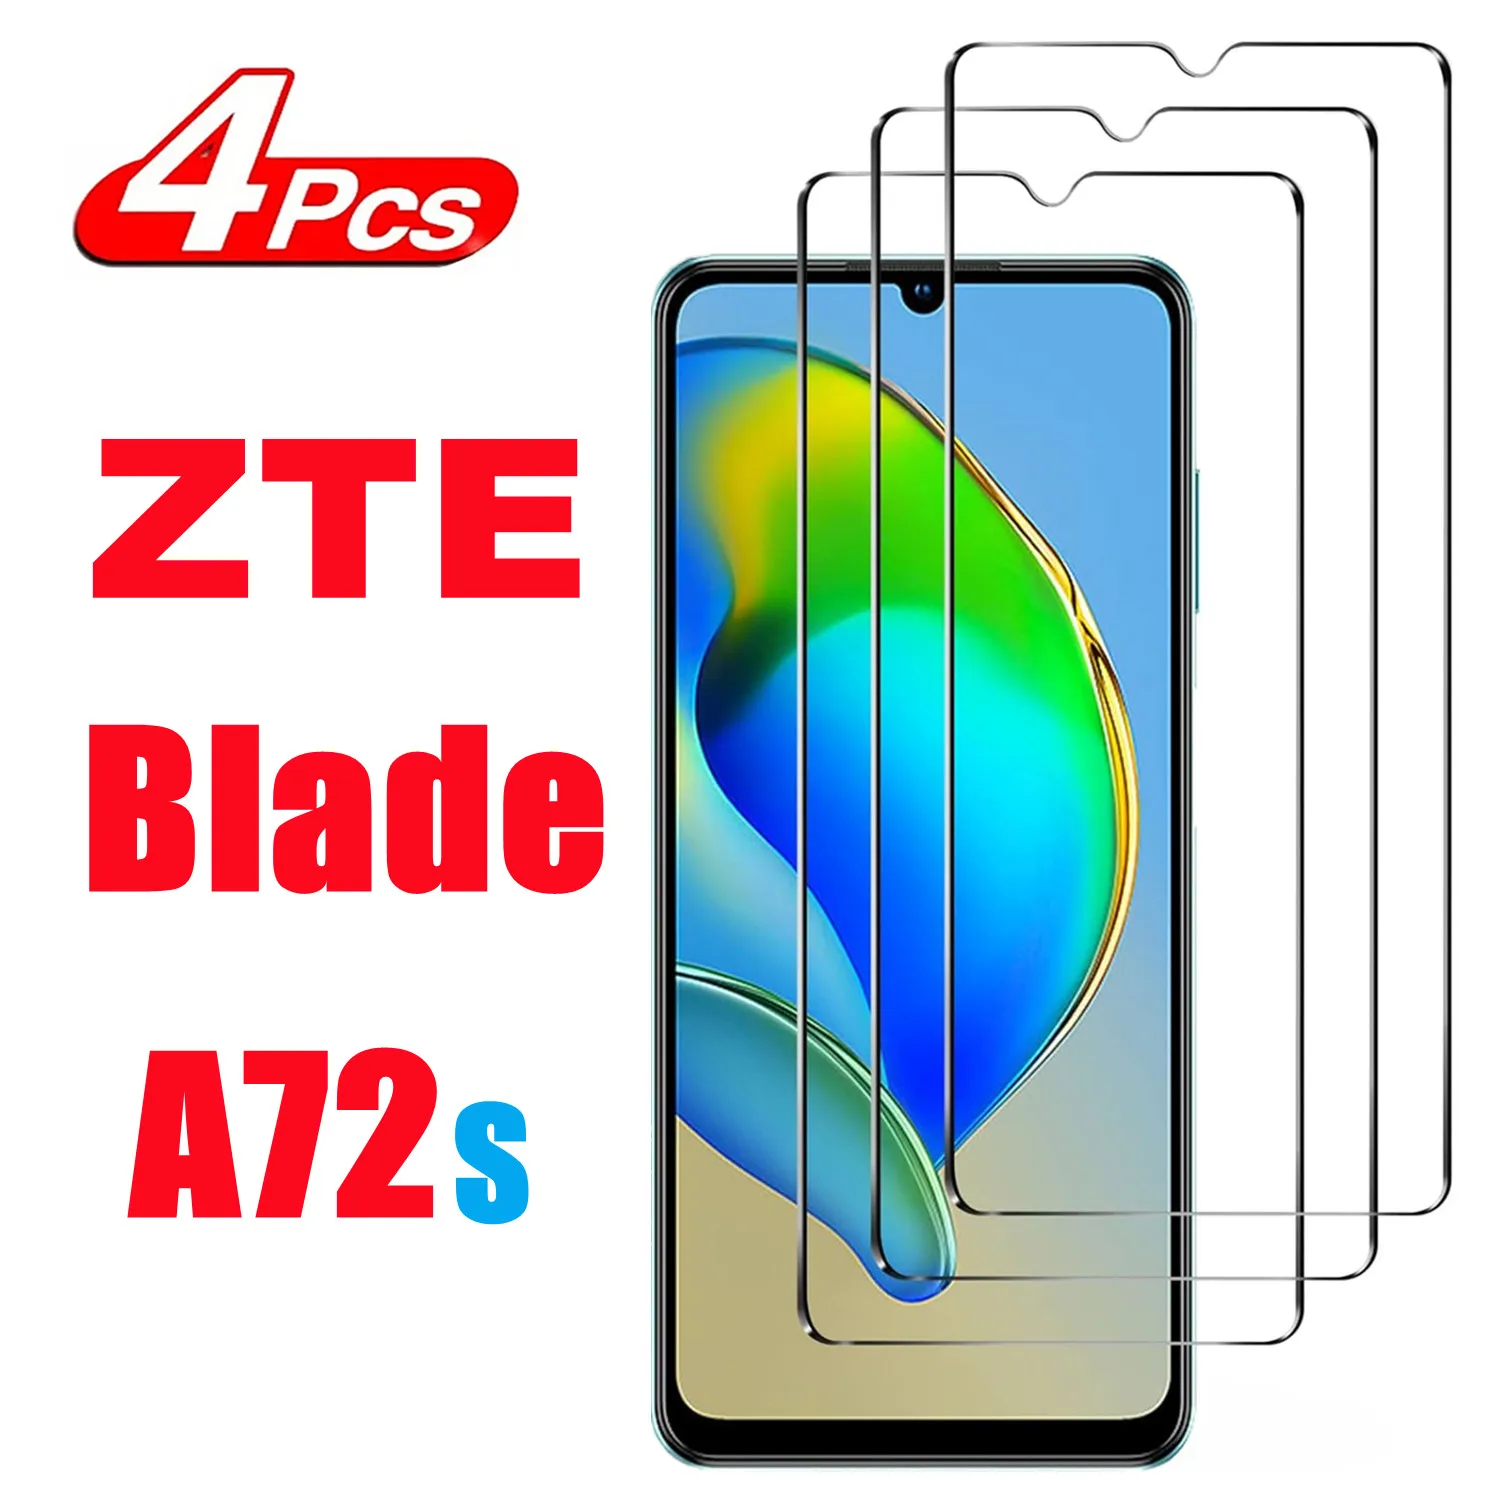 2/4 Pcs For ZTE Blade A72s 9H Tempered Glass For ZTE Blade A72s Screen Protector Glass Film for zte blade l8 tempered glass screen protector for zte blade l8 glass protective film anti scratch